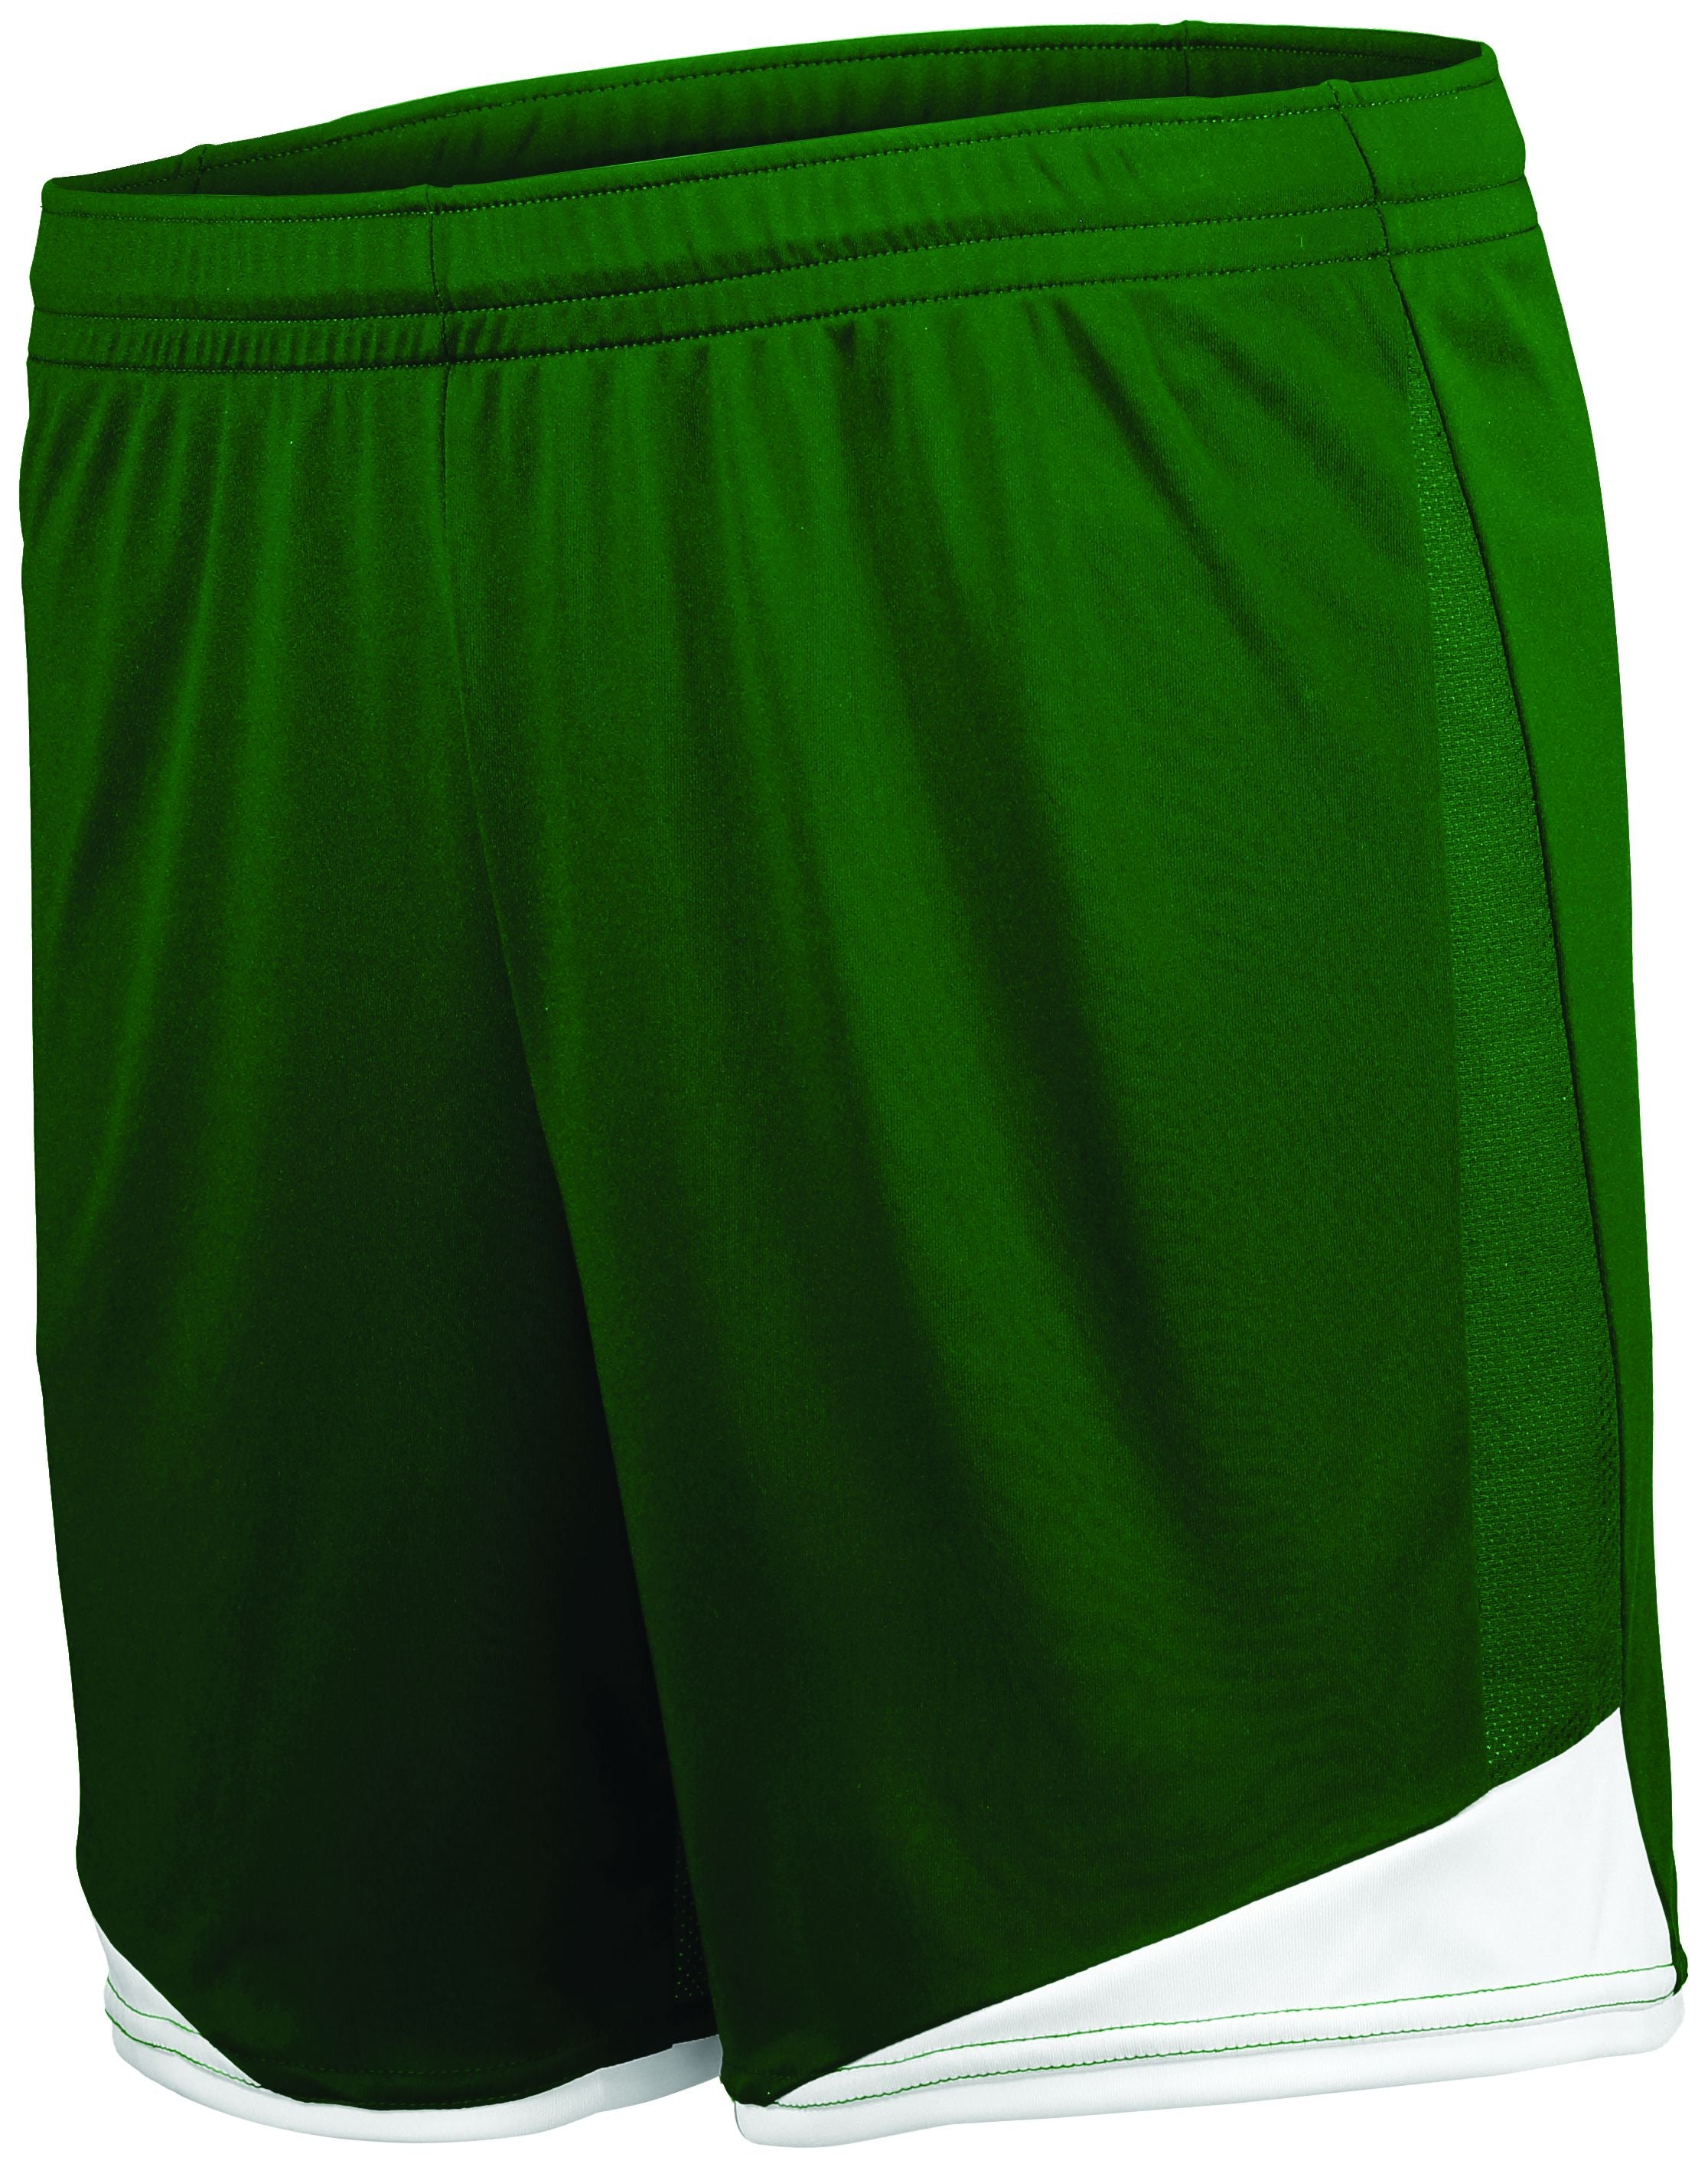 High 5 Ladies Stamford Soccer Shorts in Forest/White  -Part of the Ladies, Ladies-Shorts, High5-Products, Soccer, All-Sports-1 product lines at KanaleyCreations.com